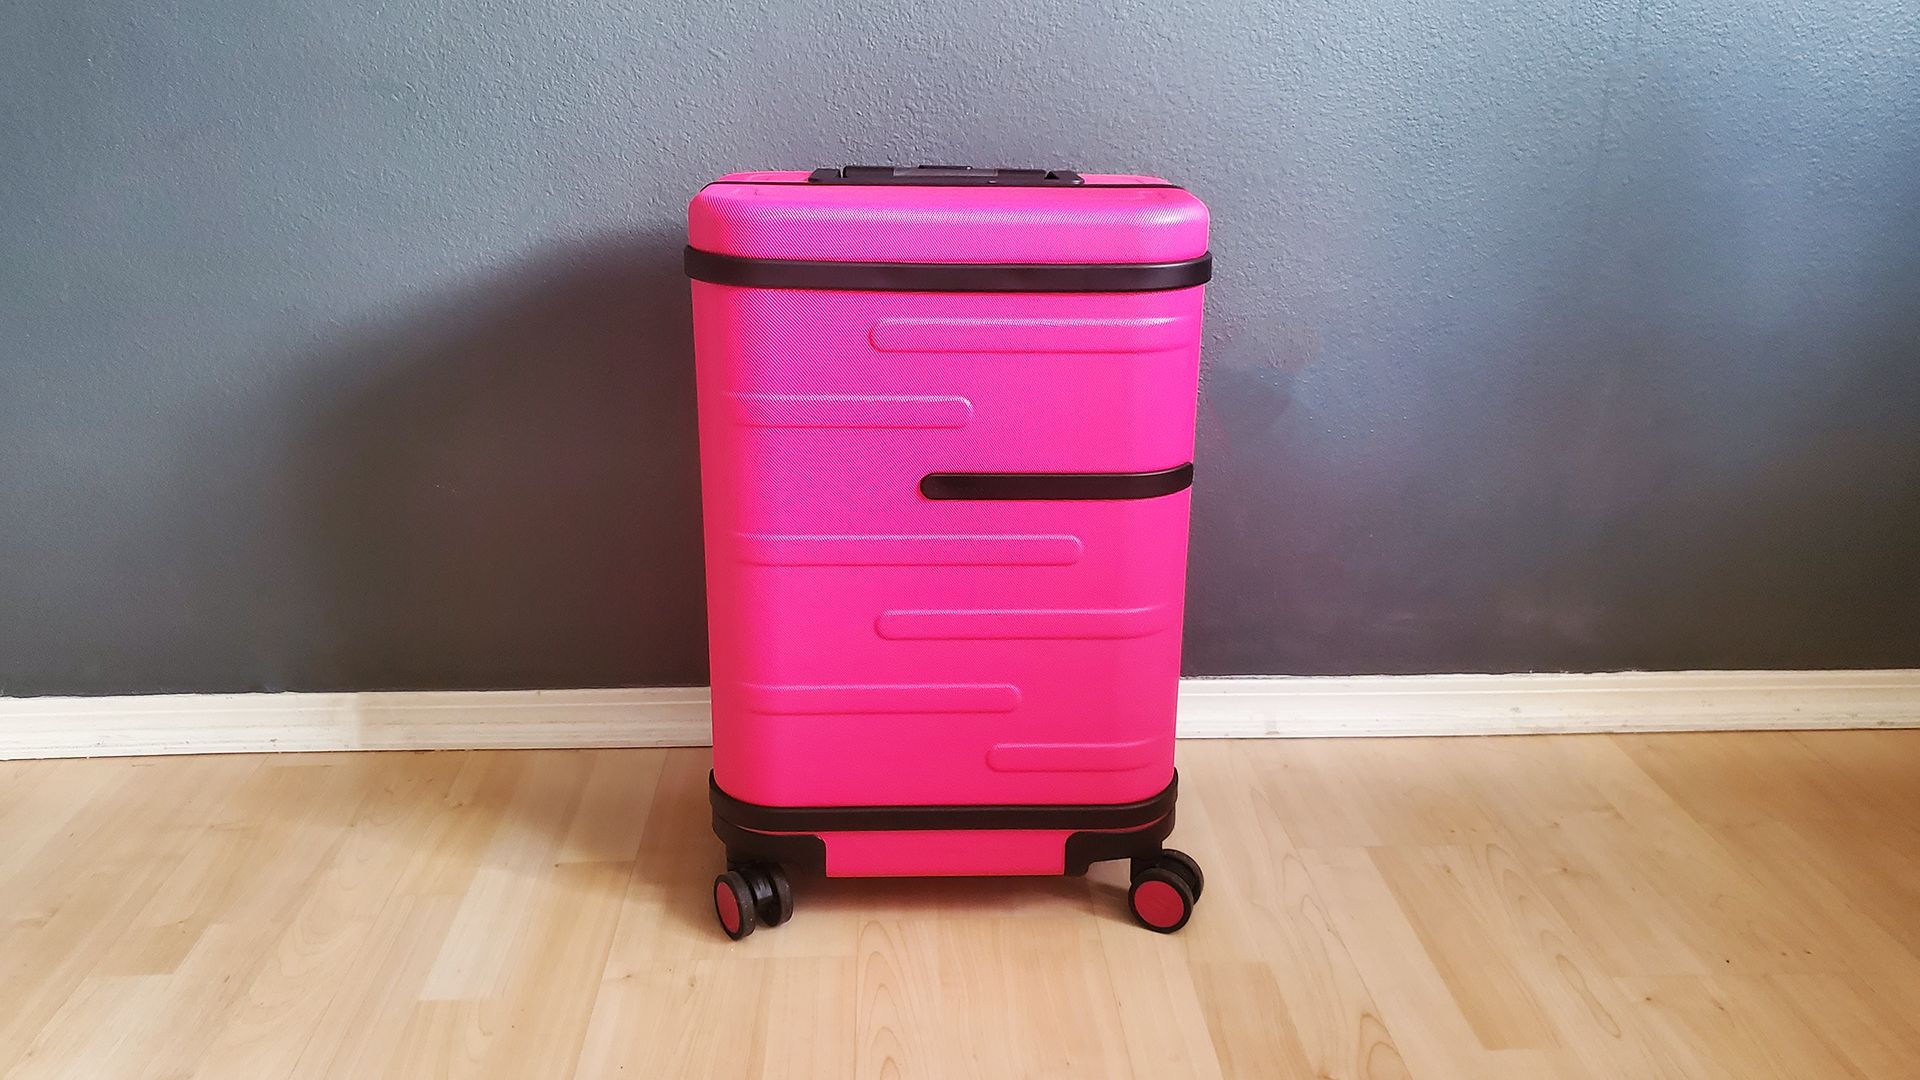 The T-Mobile Samsara Un-carrier On smart suitcase with its handle down.